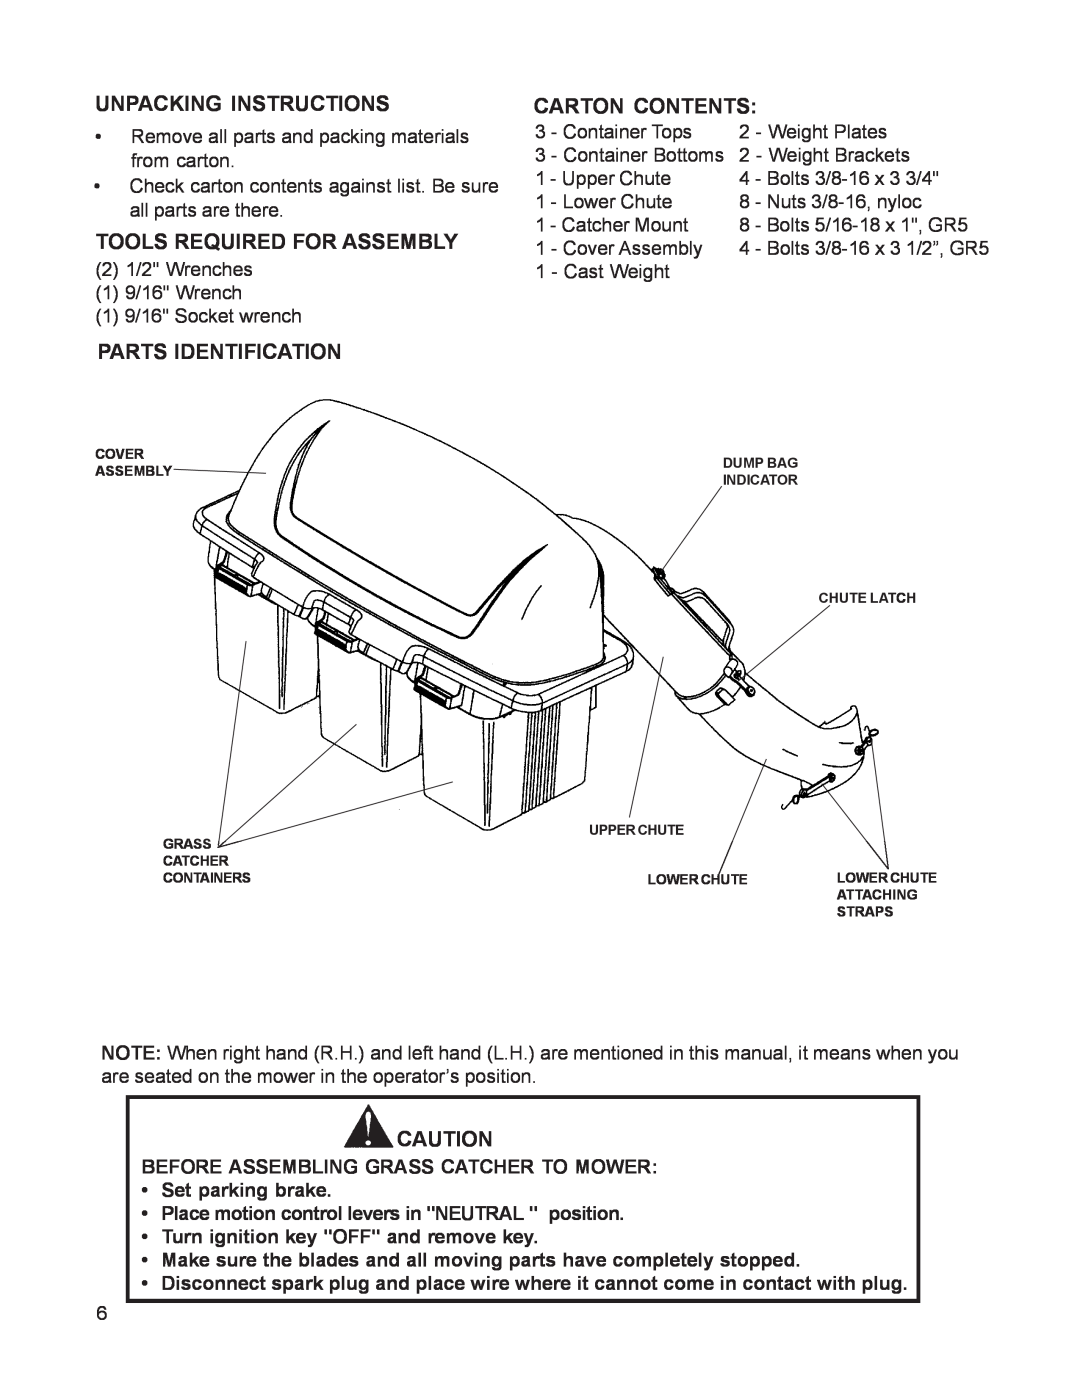 Dixon 968999515 manual Unpacking Instructions, Tools Required For Assembly, Carton Contents, Parts Identification 